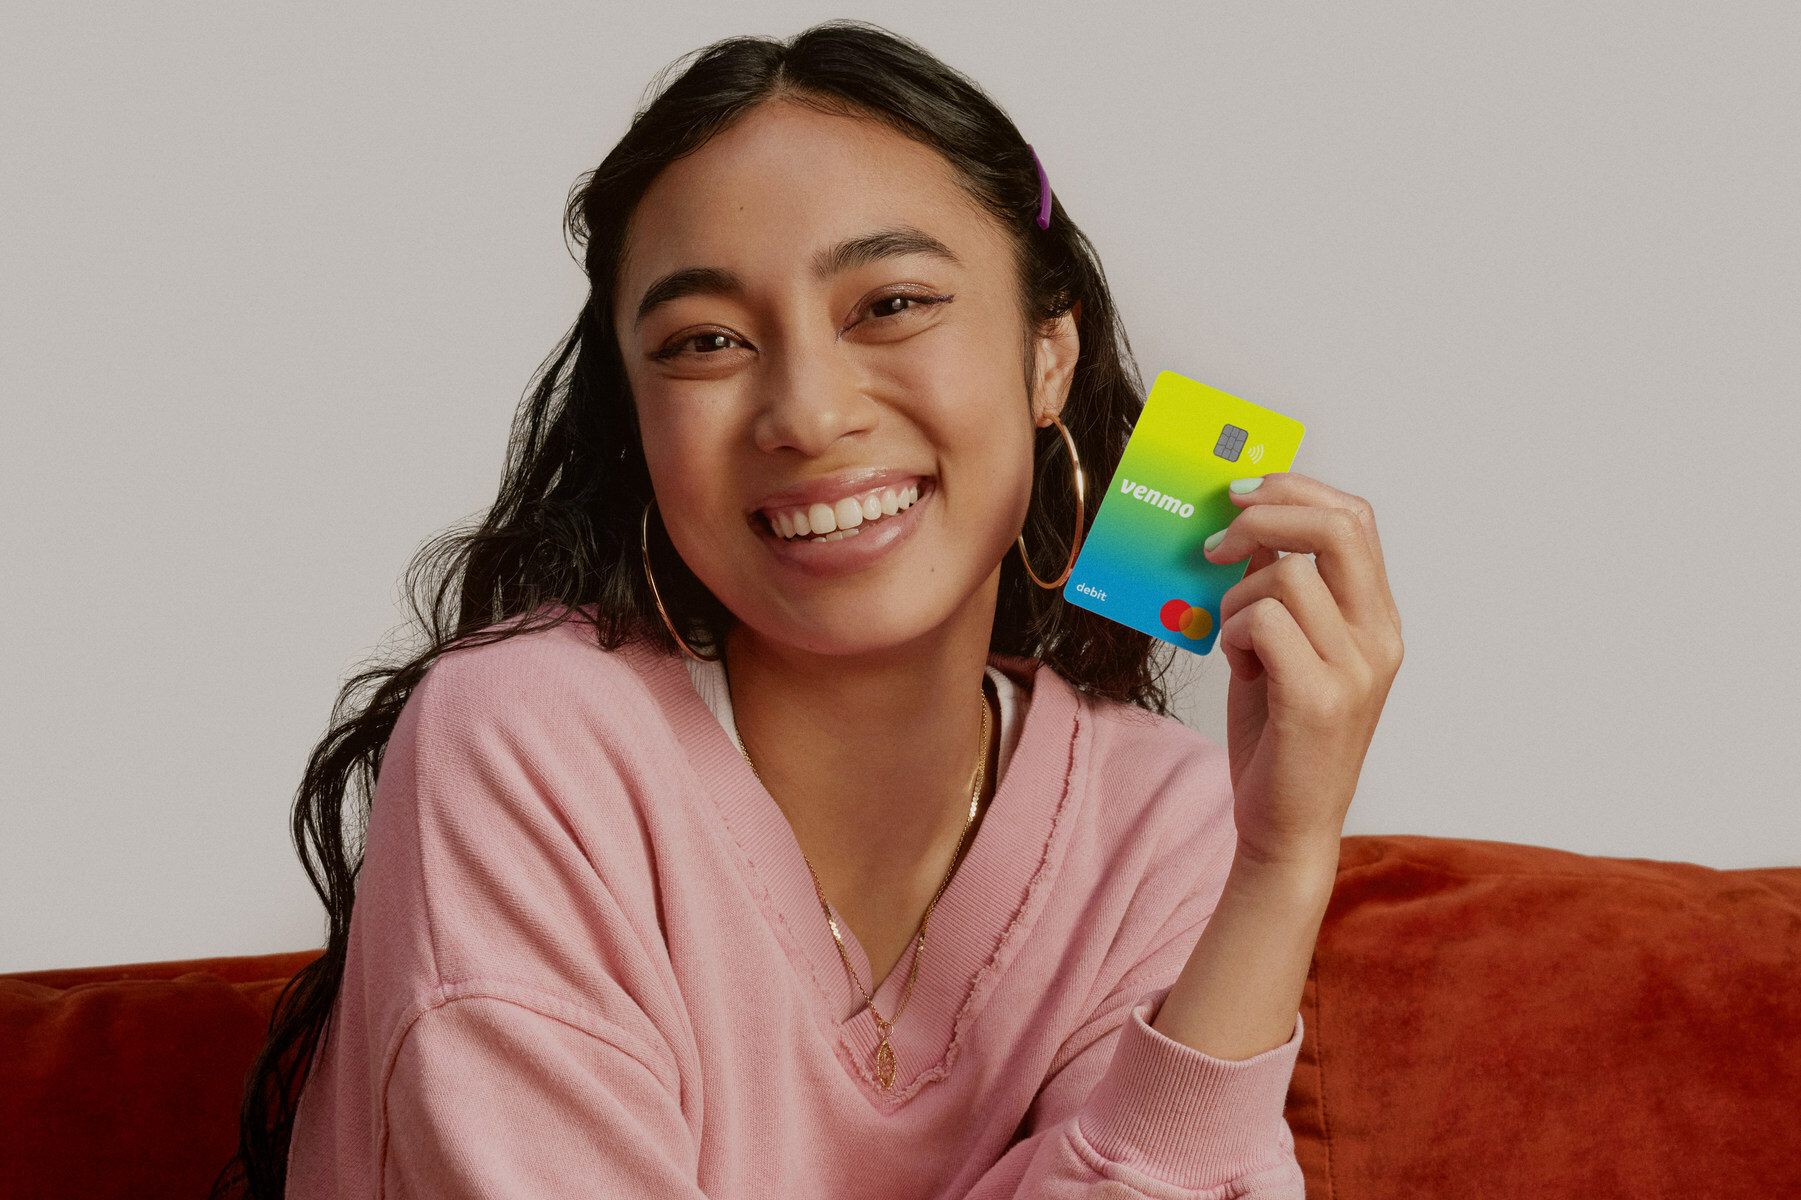 A young teen sits on a couch holding a Venmo card.